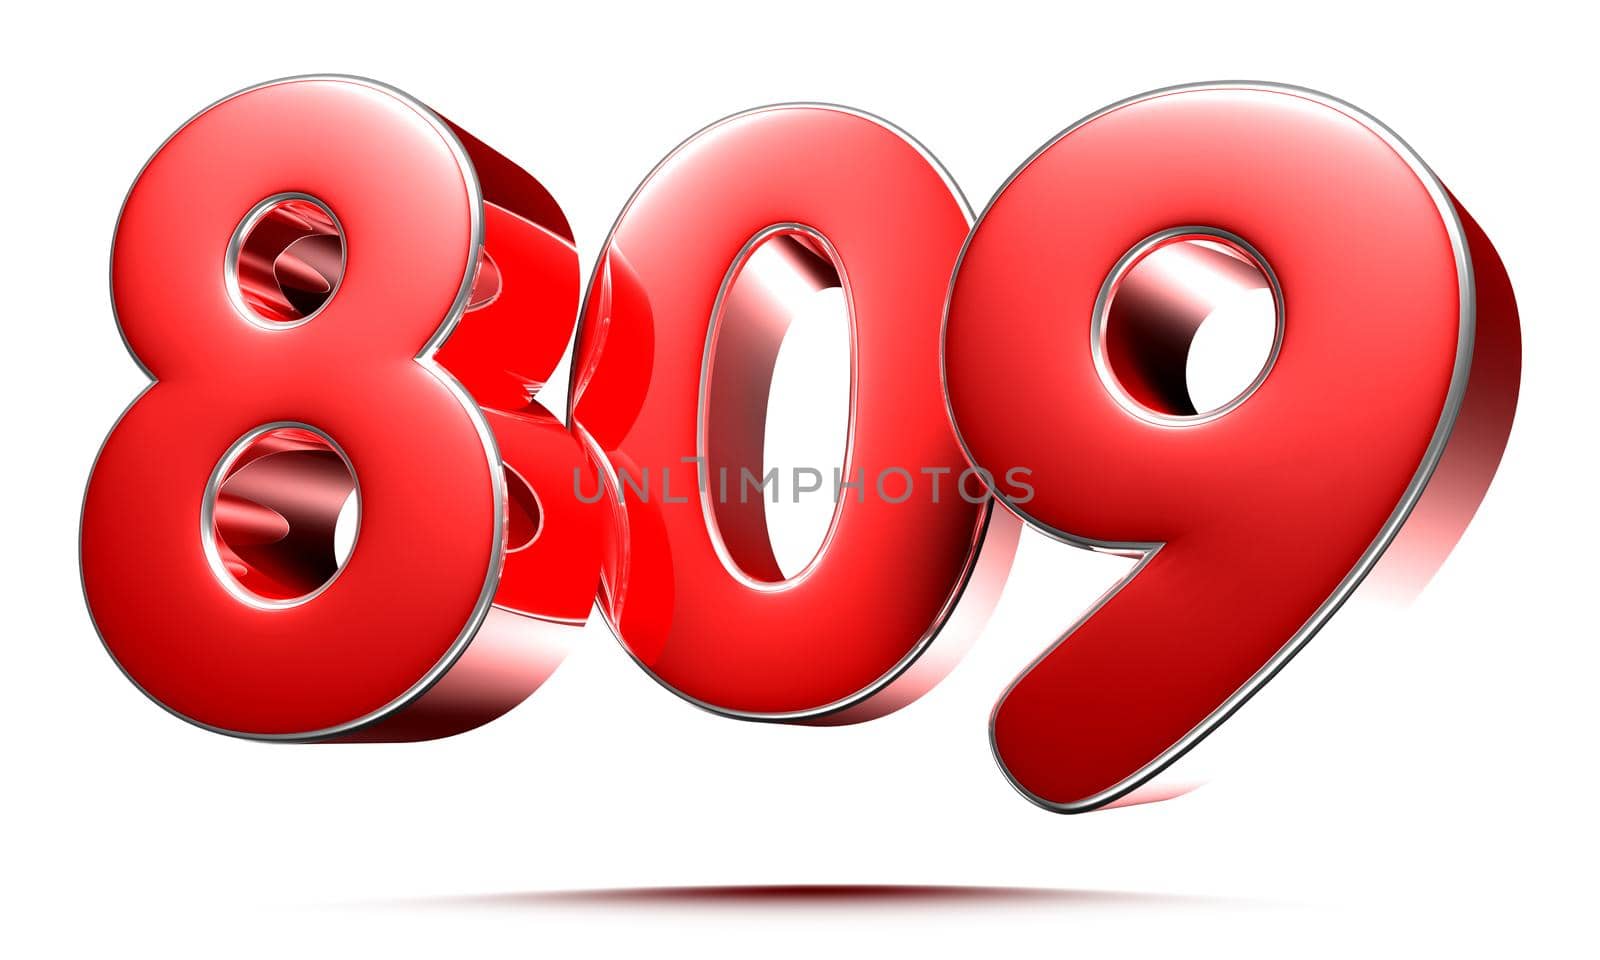 Rounded red numbers 809 on white background 3D illustration with clipping path by thitimontoyai